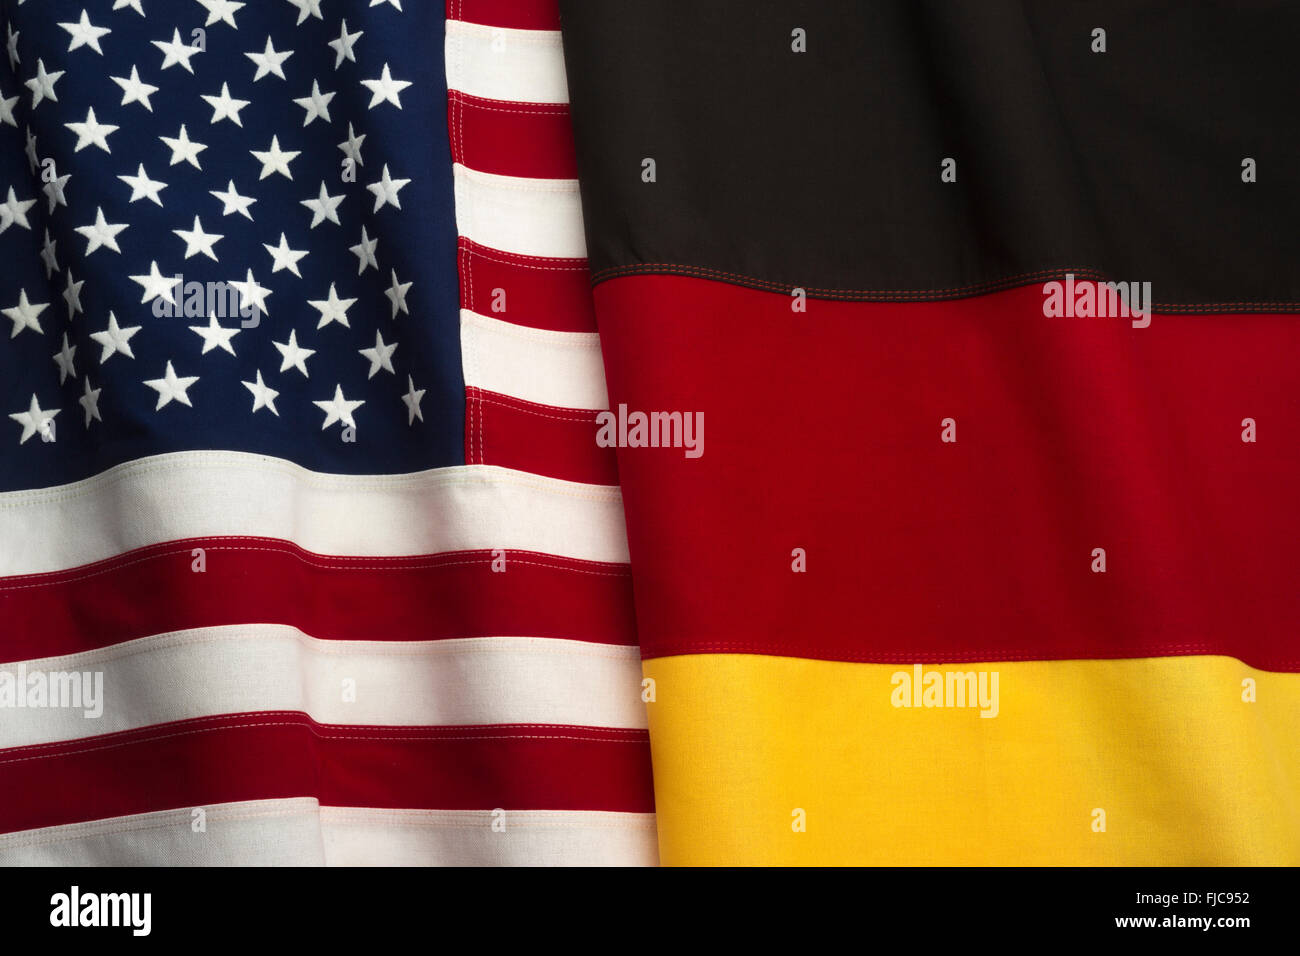 FLAGS OF UNITED STATES OF AMERICA AND GERMANY MADE OF STITCHED COTTON BUNTING Stock Photo